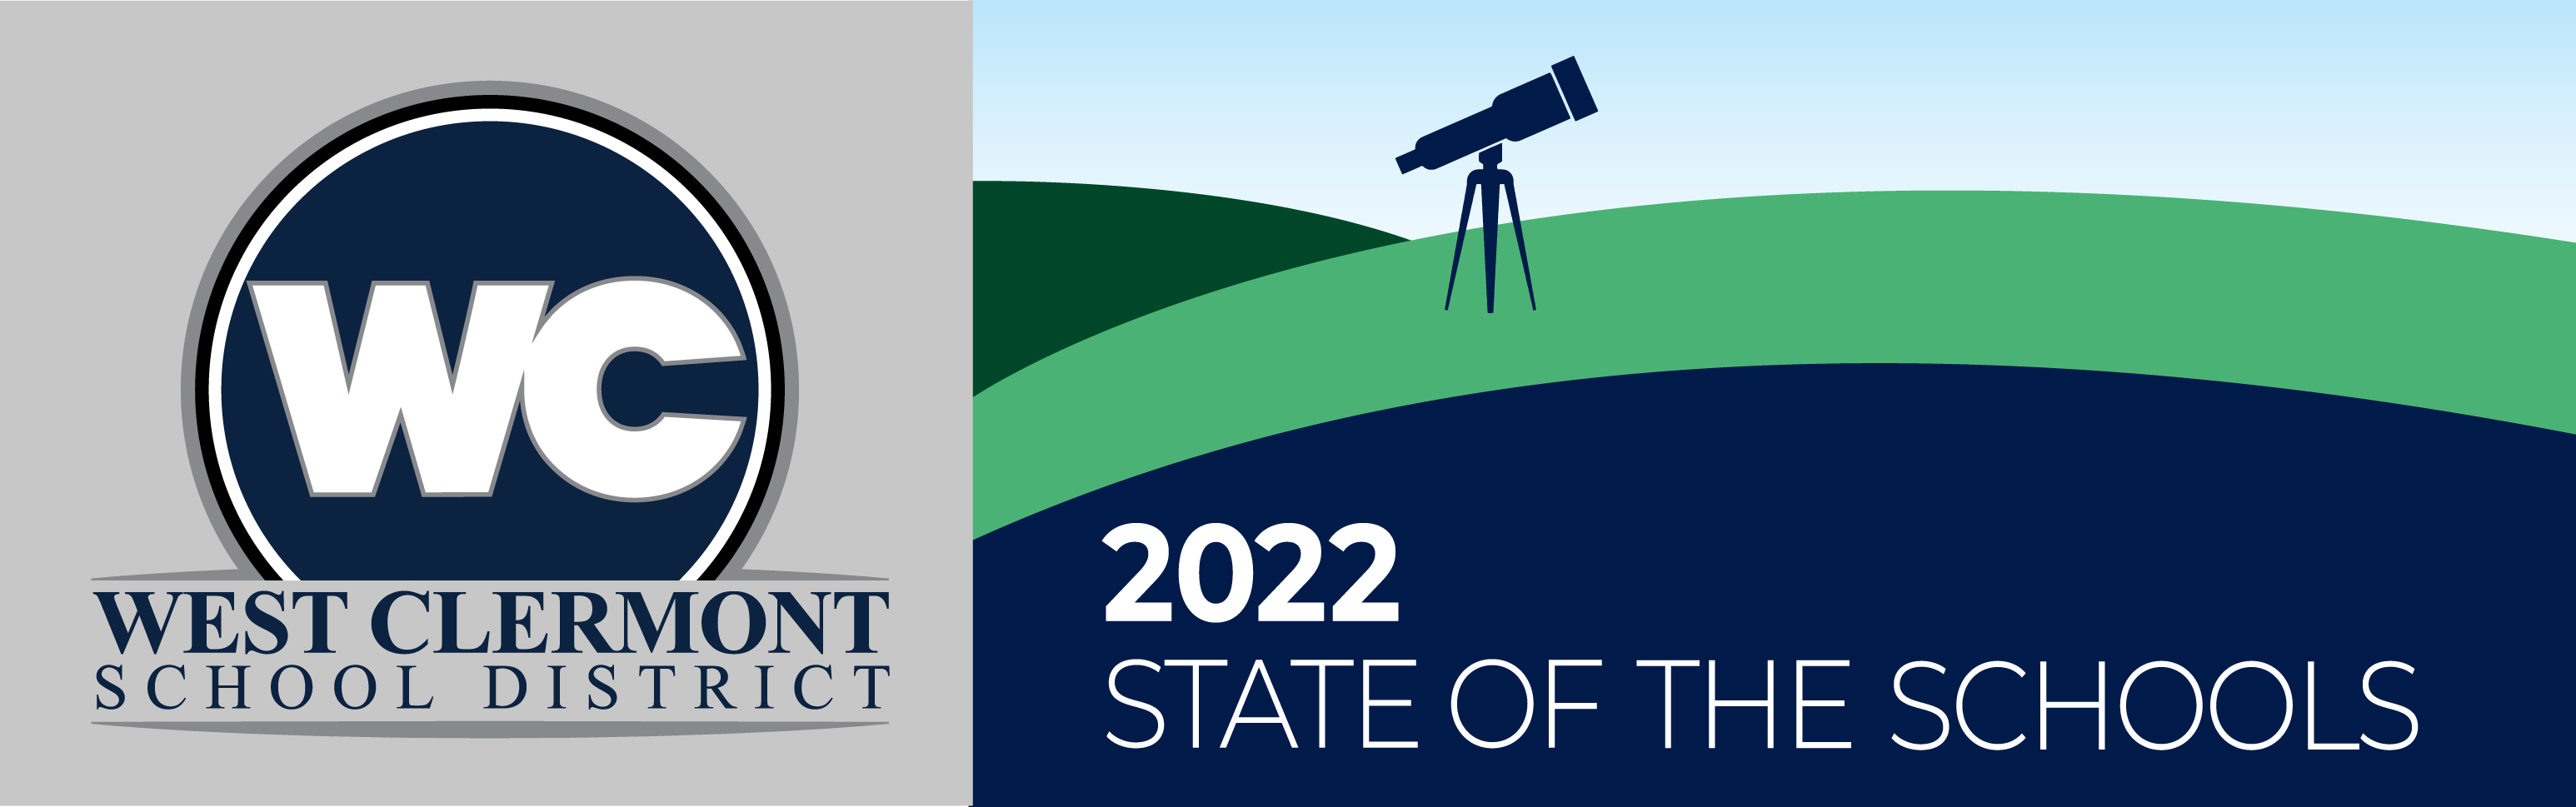 Graphic of hills with a telescope and text that says "2022 State of the Schools"